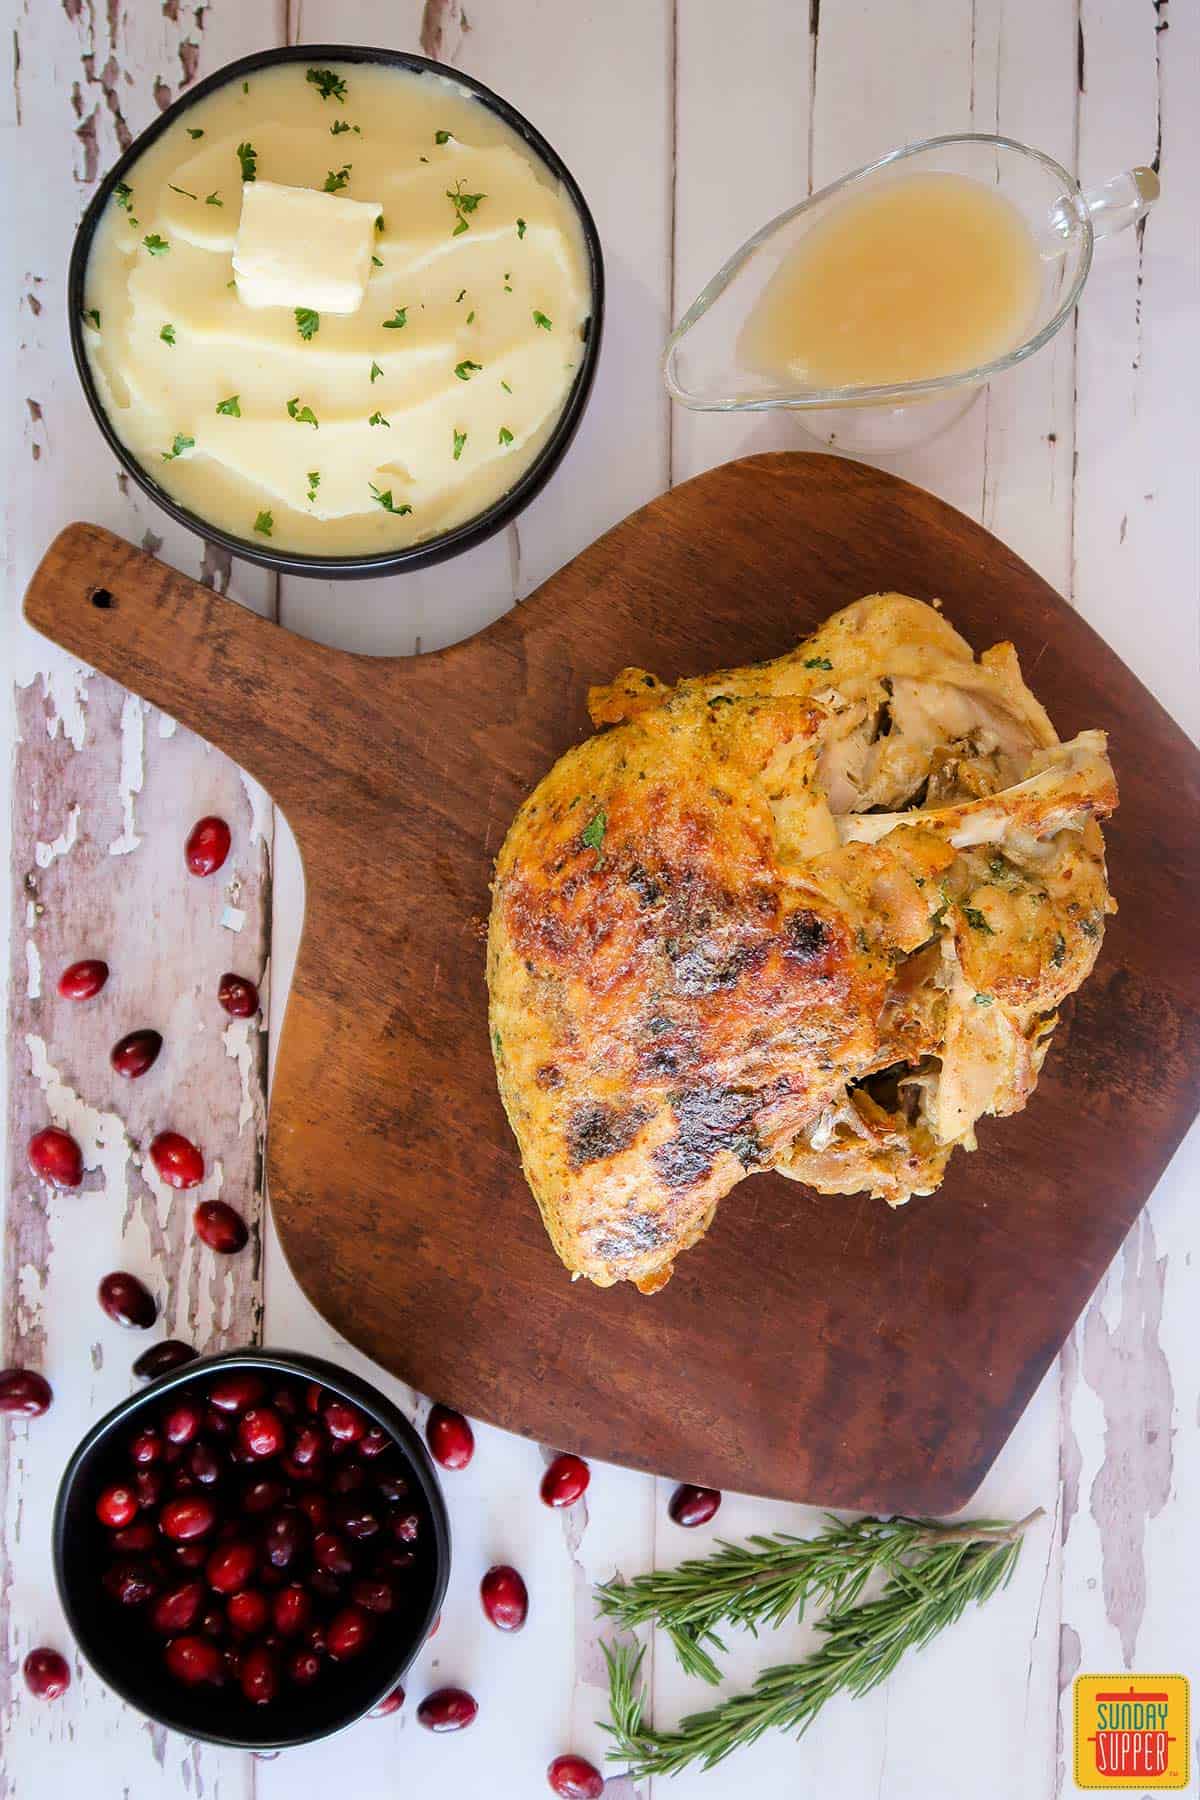 Instant pot turkey breast on a cutting board next to a bowl of cranberries, mashed potatoes, rosemary sprigs, and gravy